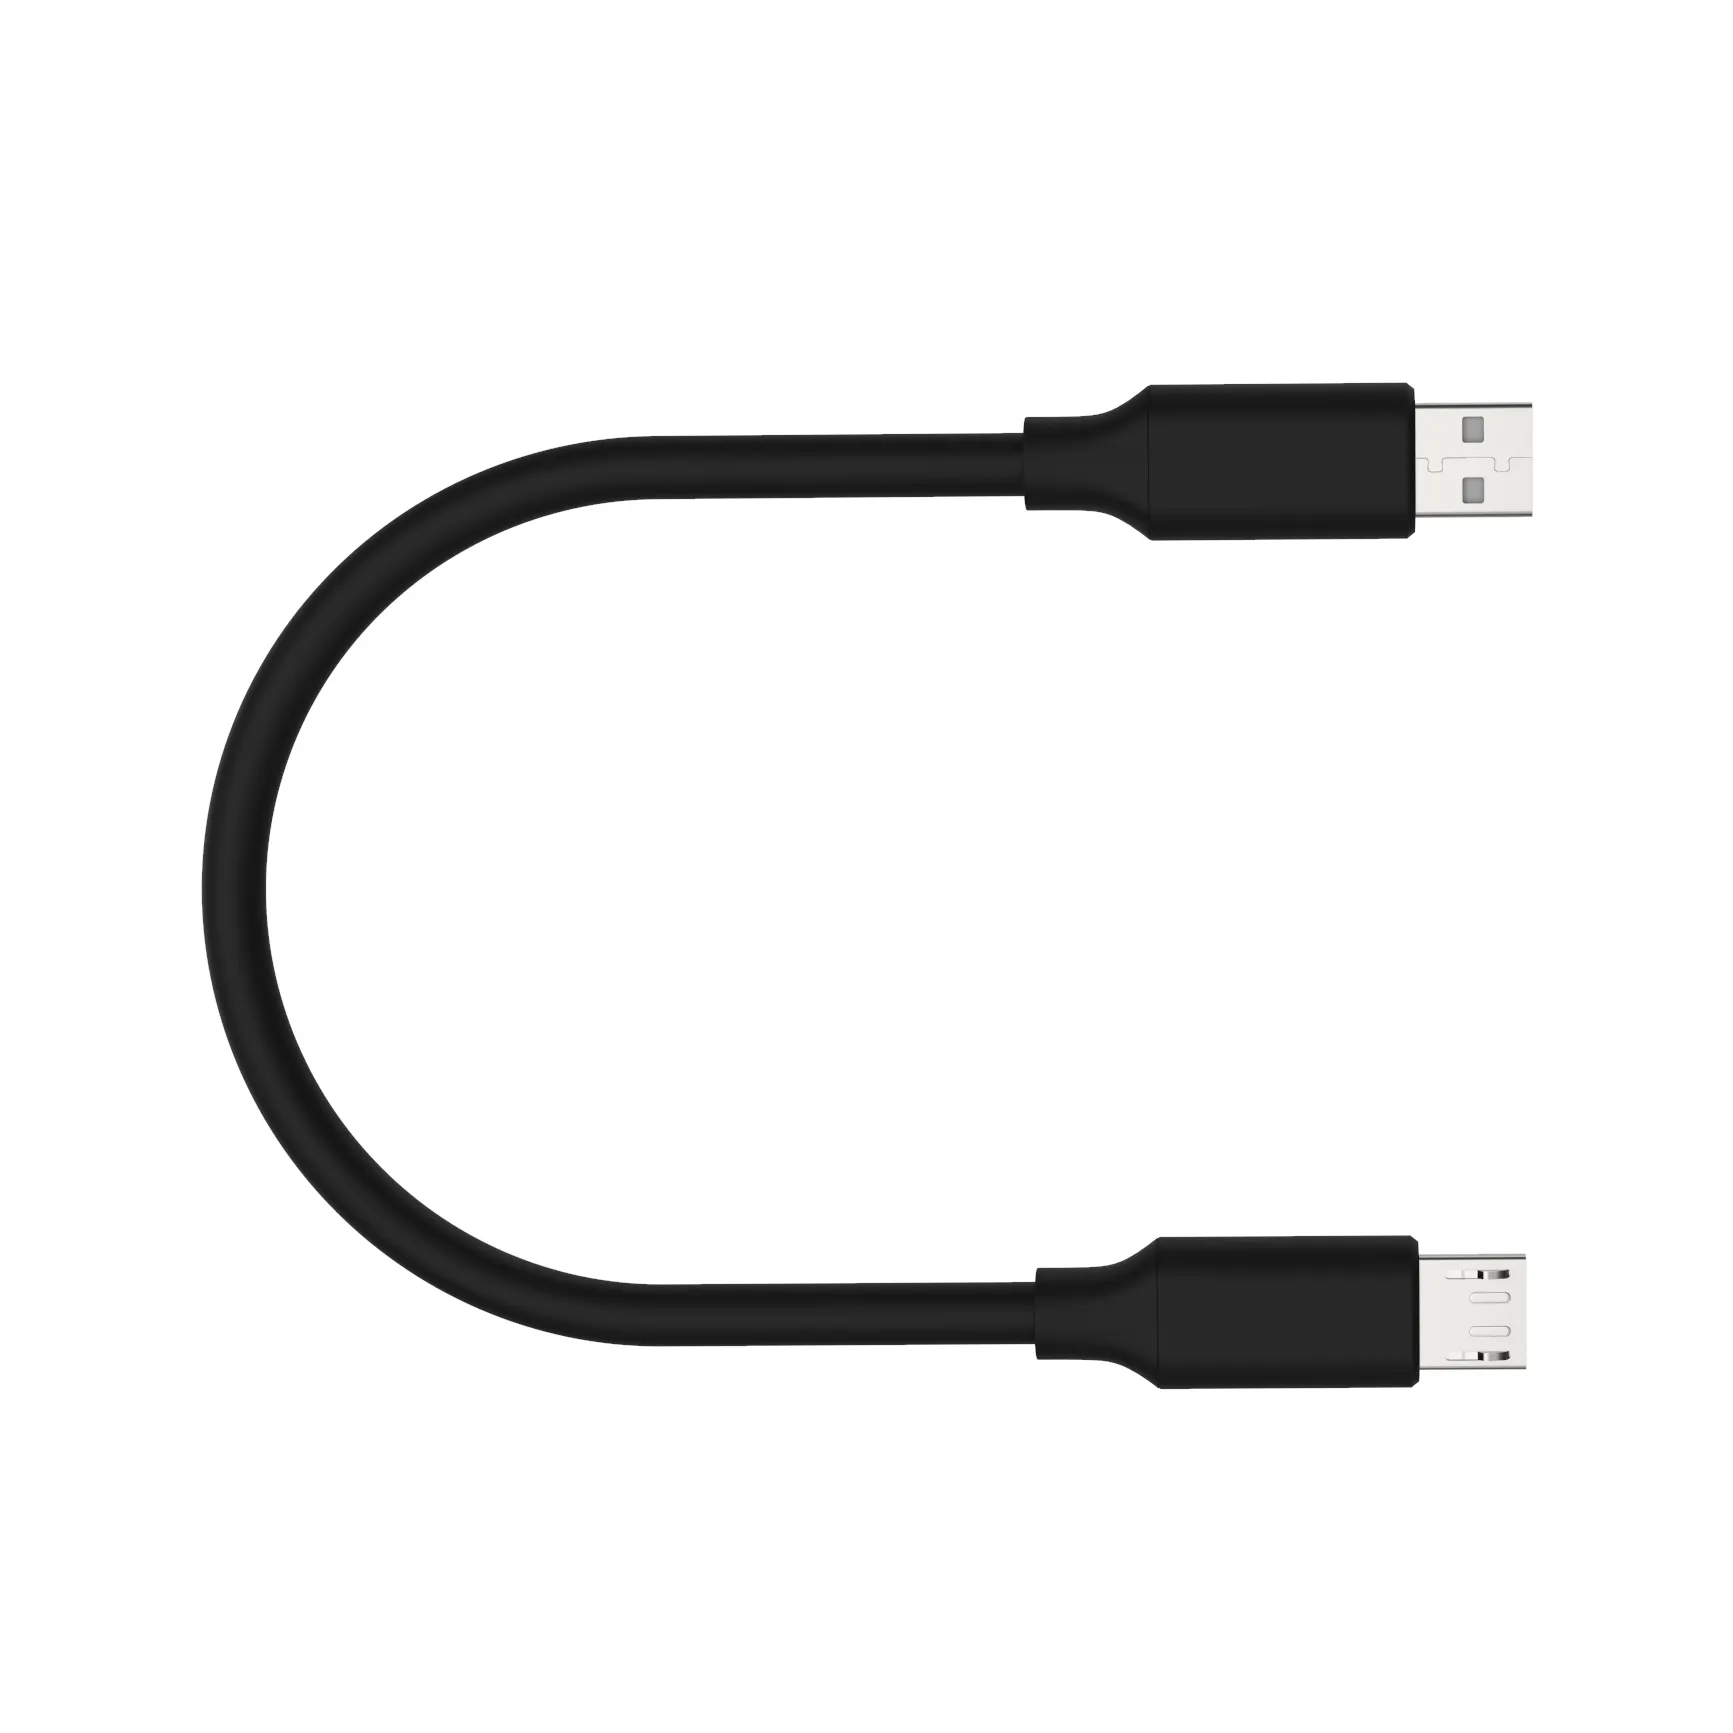 USB Type-A to Micro-B Cable 2.0 Micro USB Charger Cable